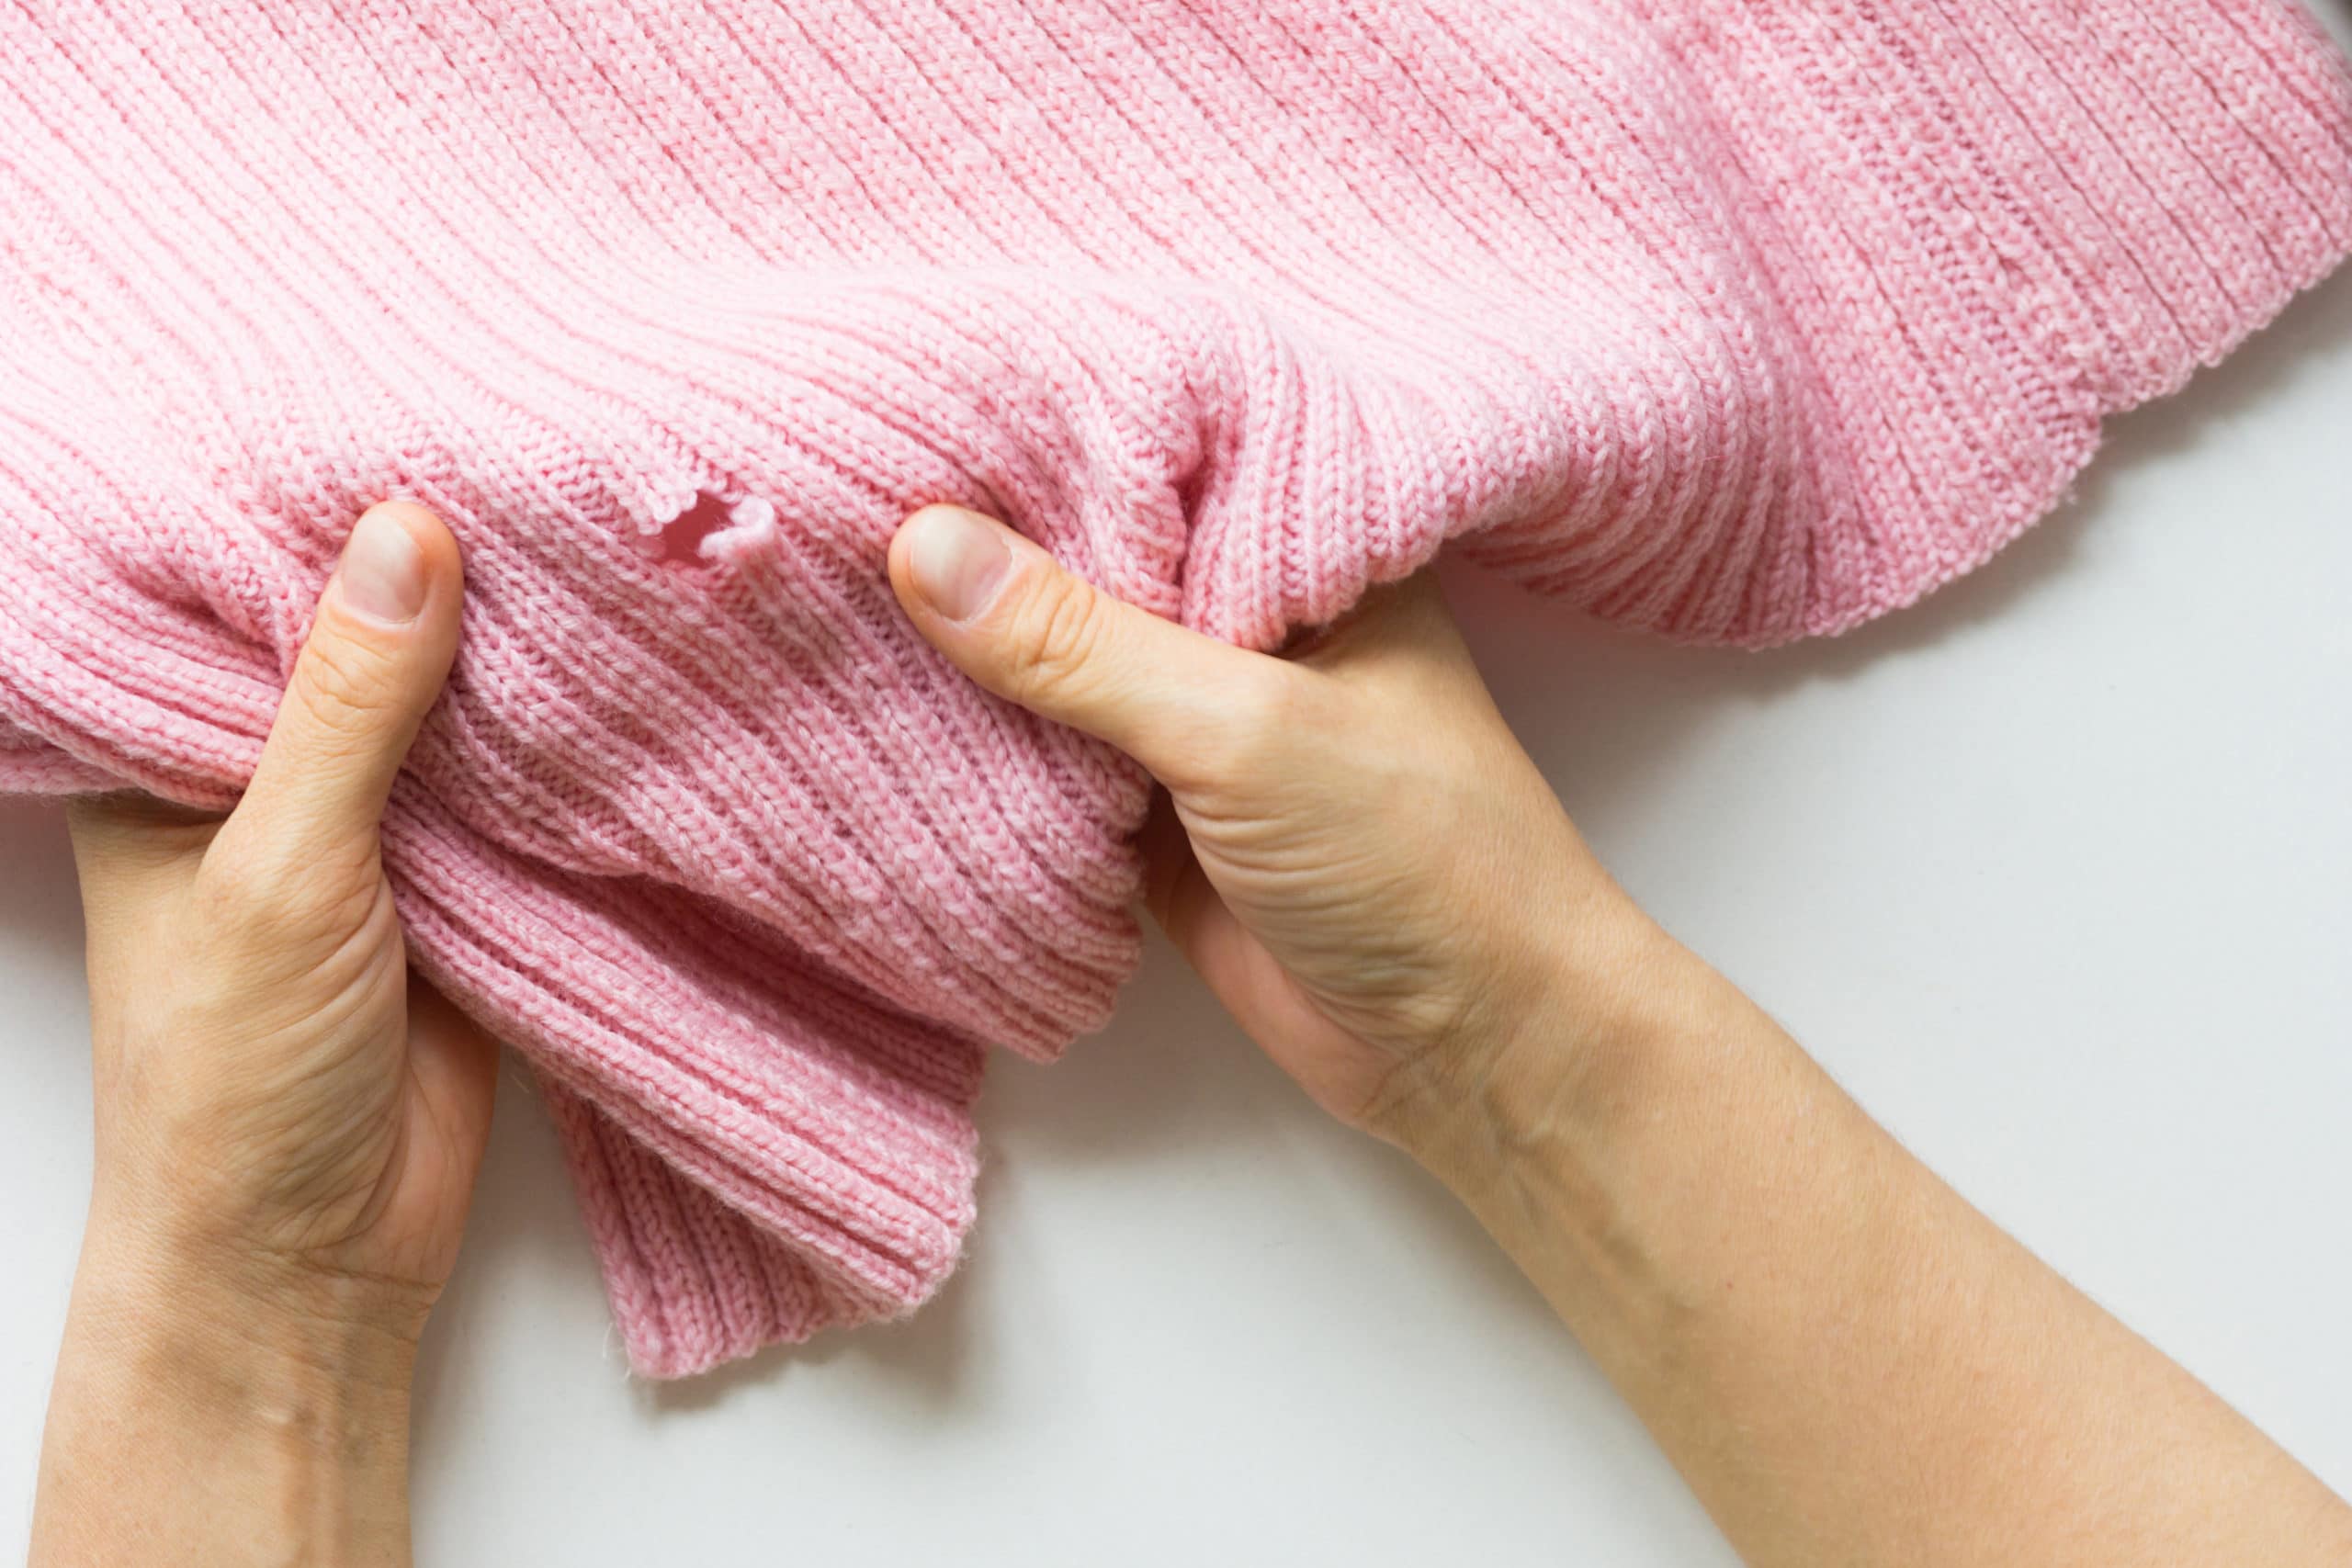 Woman hands holding the knitted thing with hole made by a clothes moth